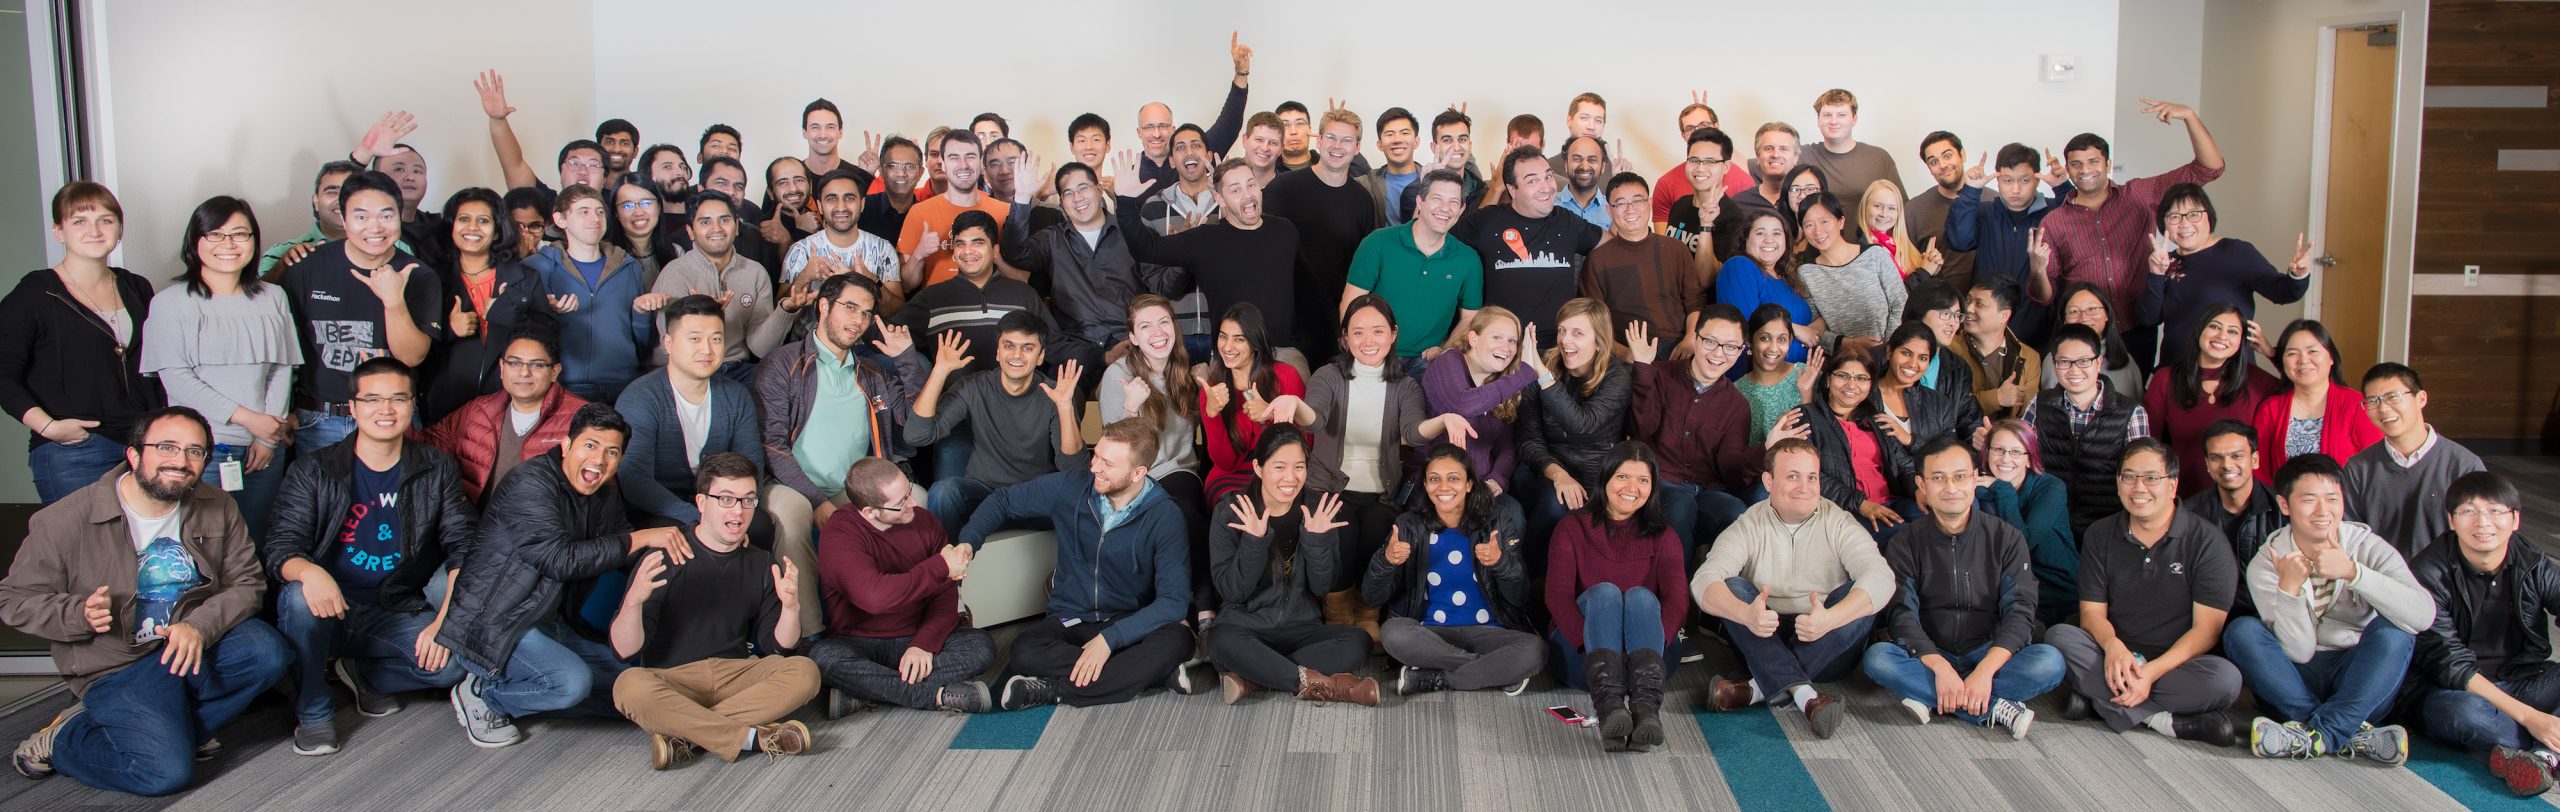 The Microsoft Silicon Valley PowerPoint team celebrates 30 year of innovation.